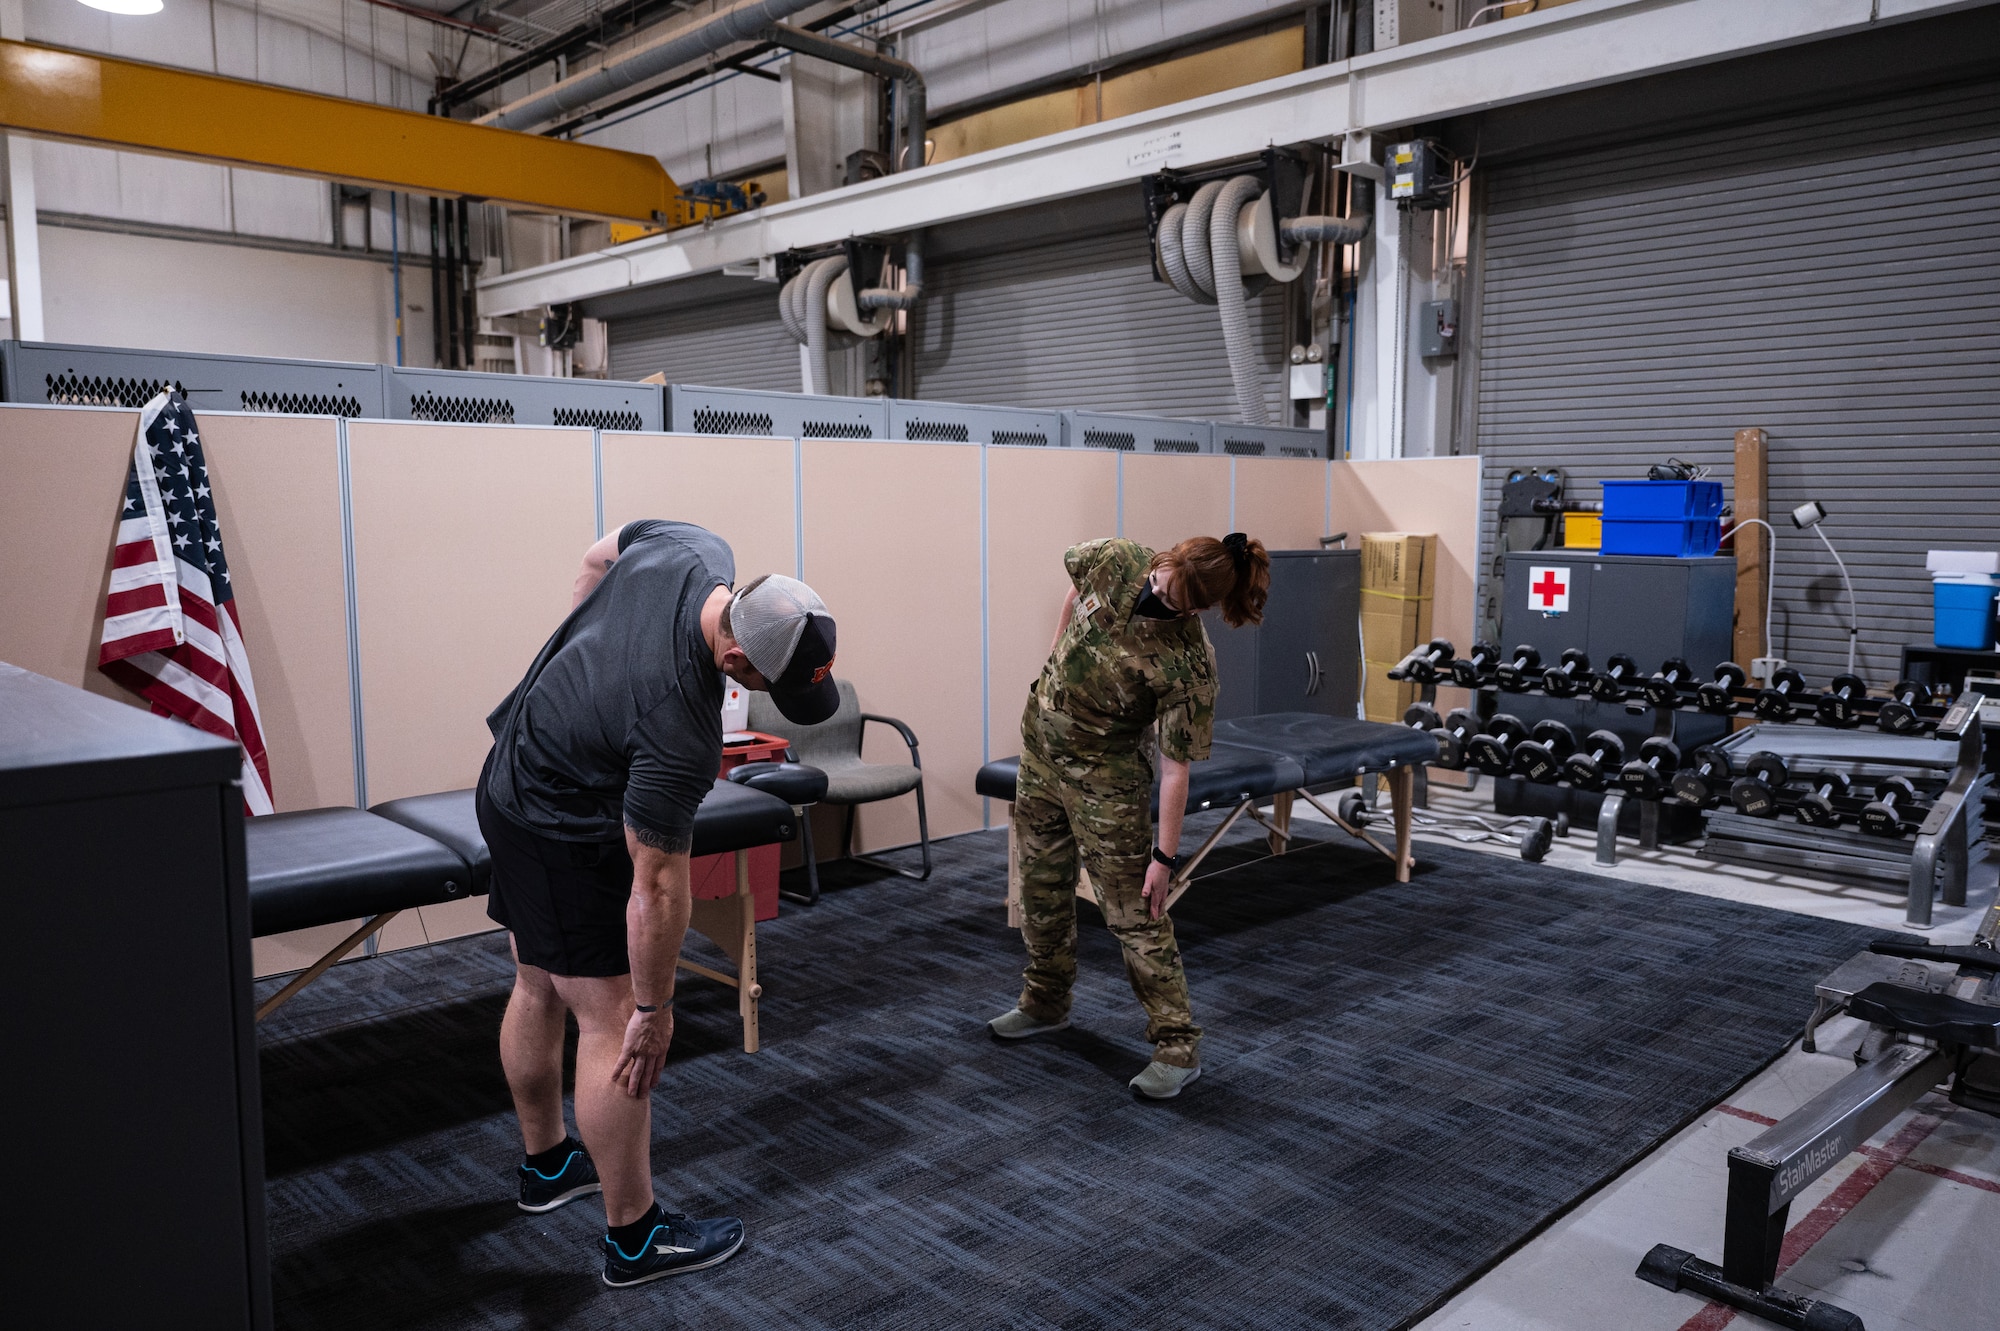 U.S. Air Force Captain Kara Heath, a physical therapist from the 379th Expeditionary Operational Medical Readiness Squadron, Al Udeid Air Base, Qatar, demonstrates to her physical therapy patient how to perform stretch June 10, 2022. Her care helped ensure that an Airman was able to continue to perform his duties without furthering his injuries. (U.S. Air Force photo by Staff Sgt. Dana Tourtellotte)